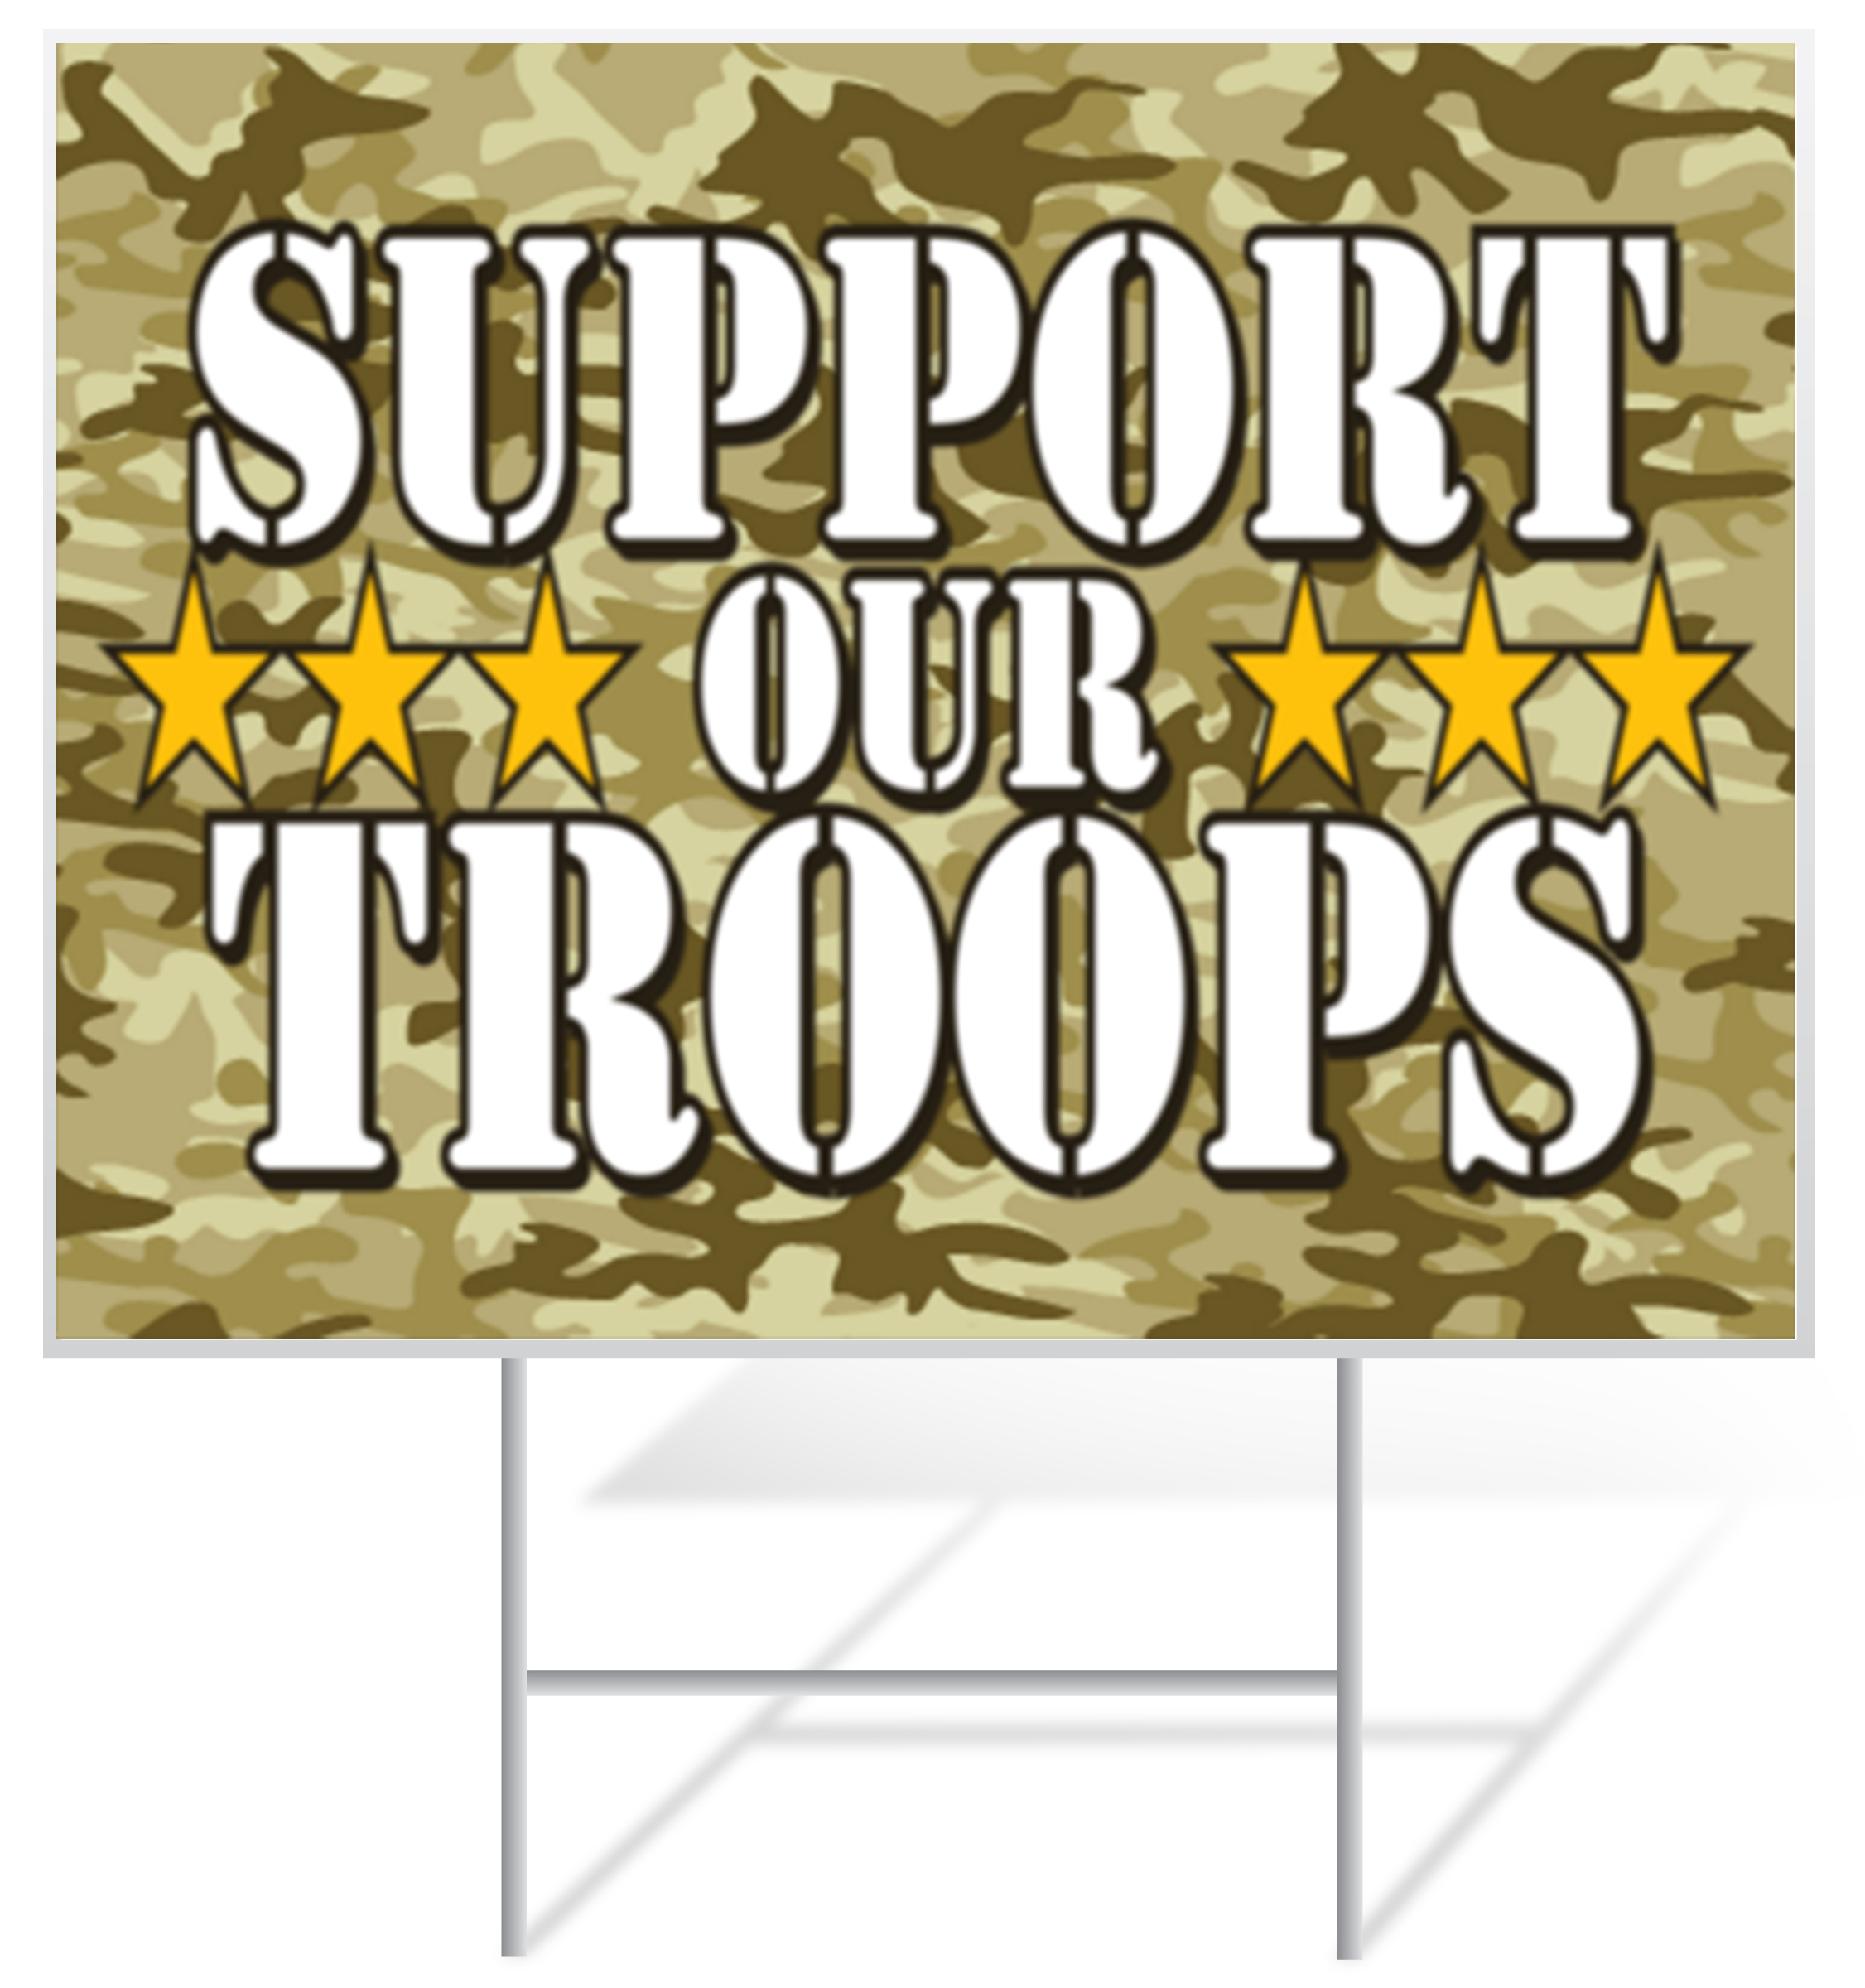 Military Lawn Sign Example | LawnSigns.com